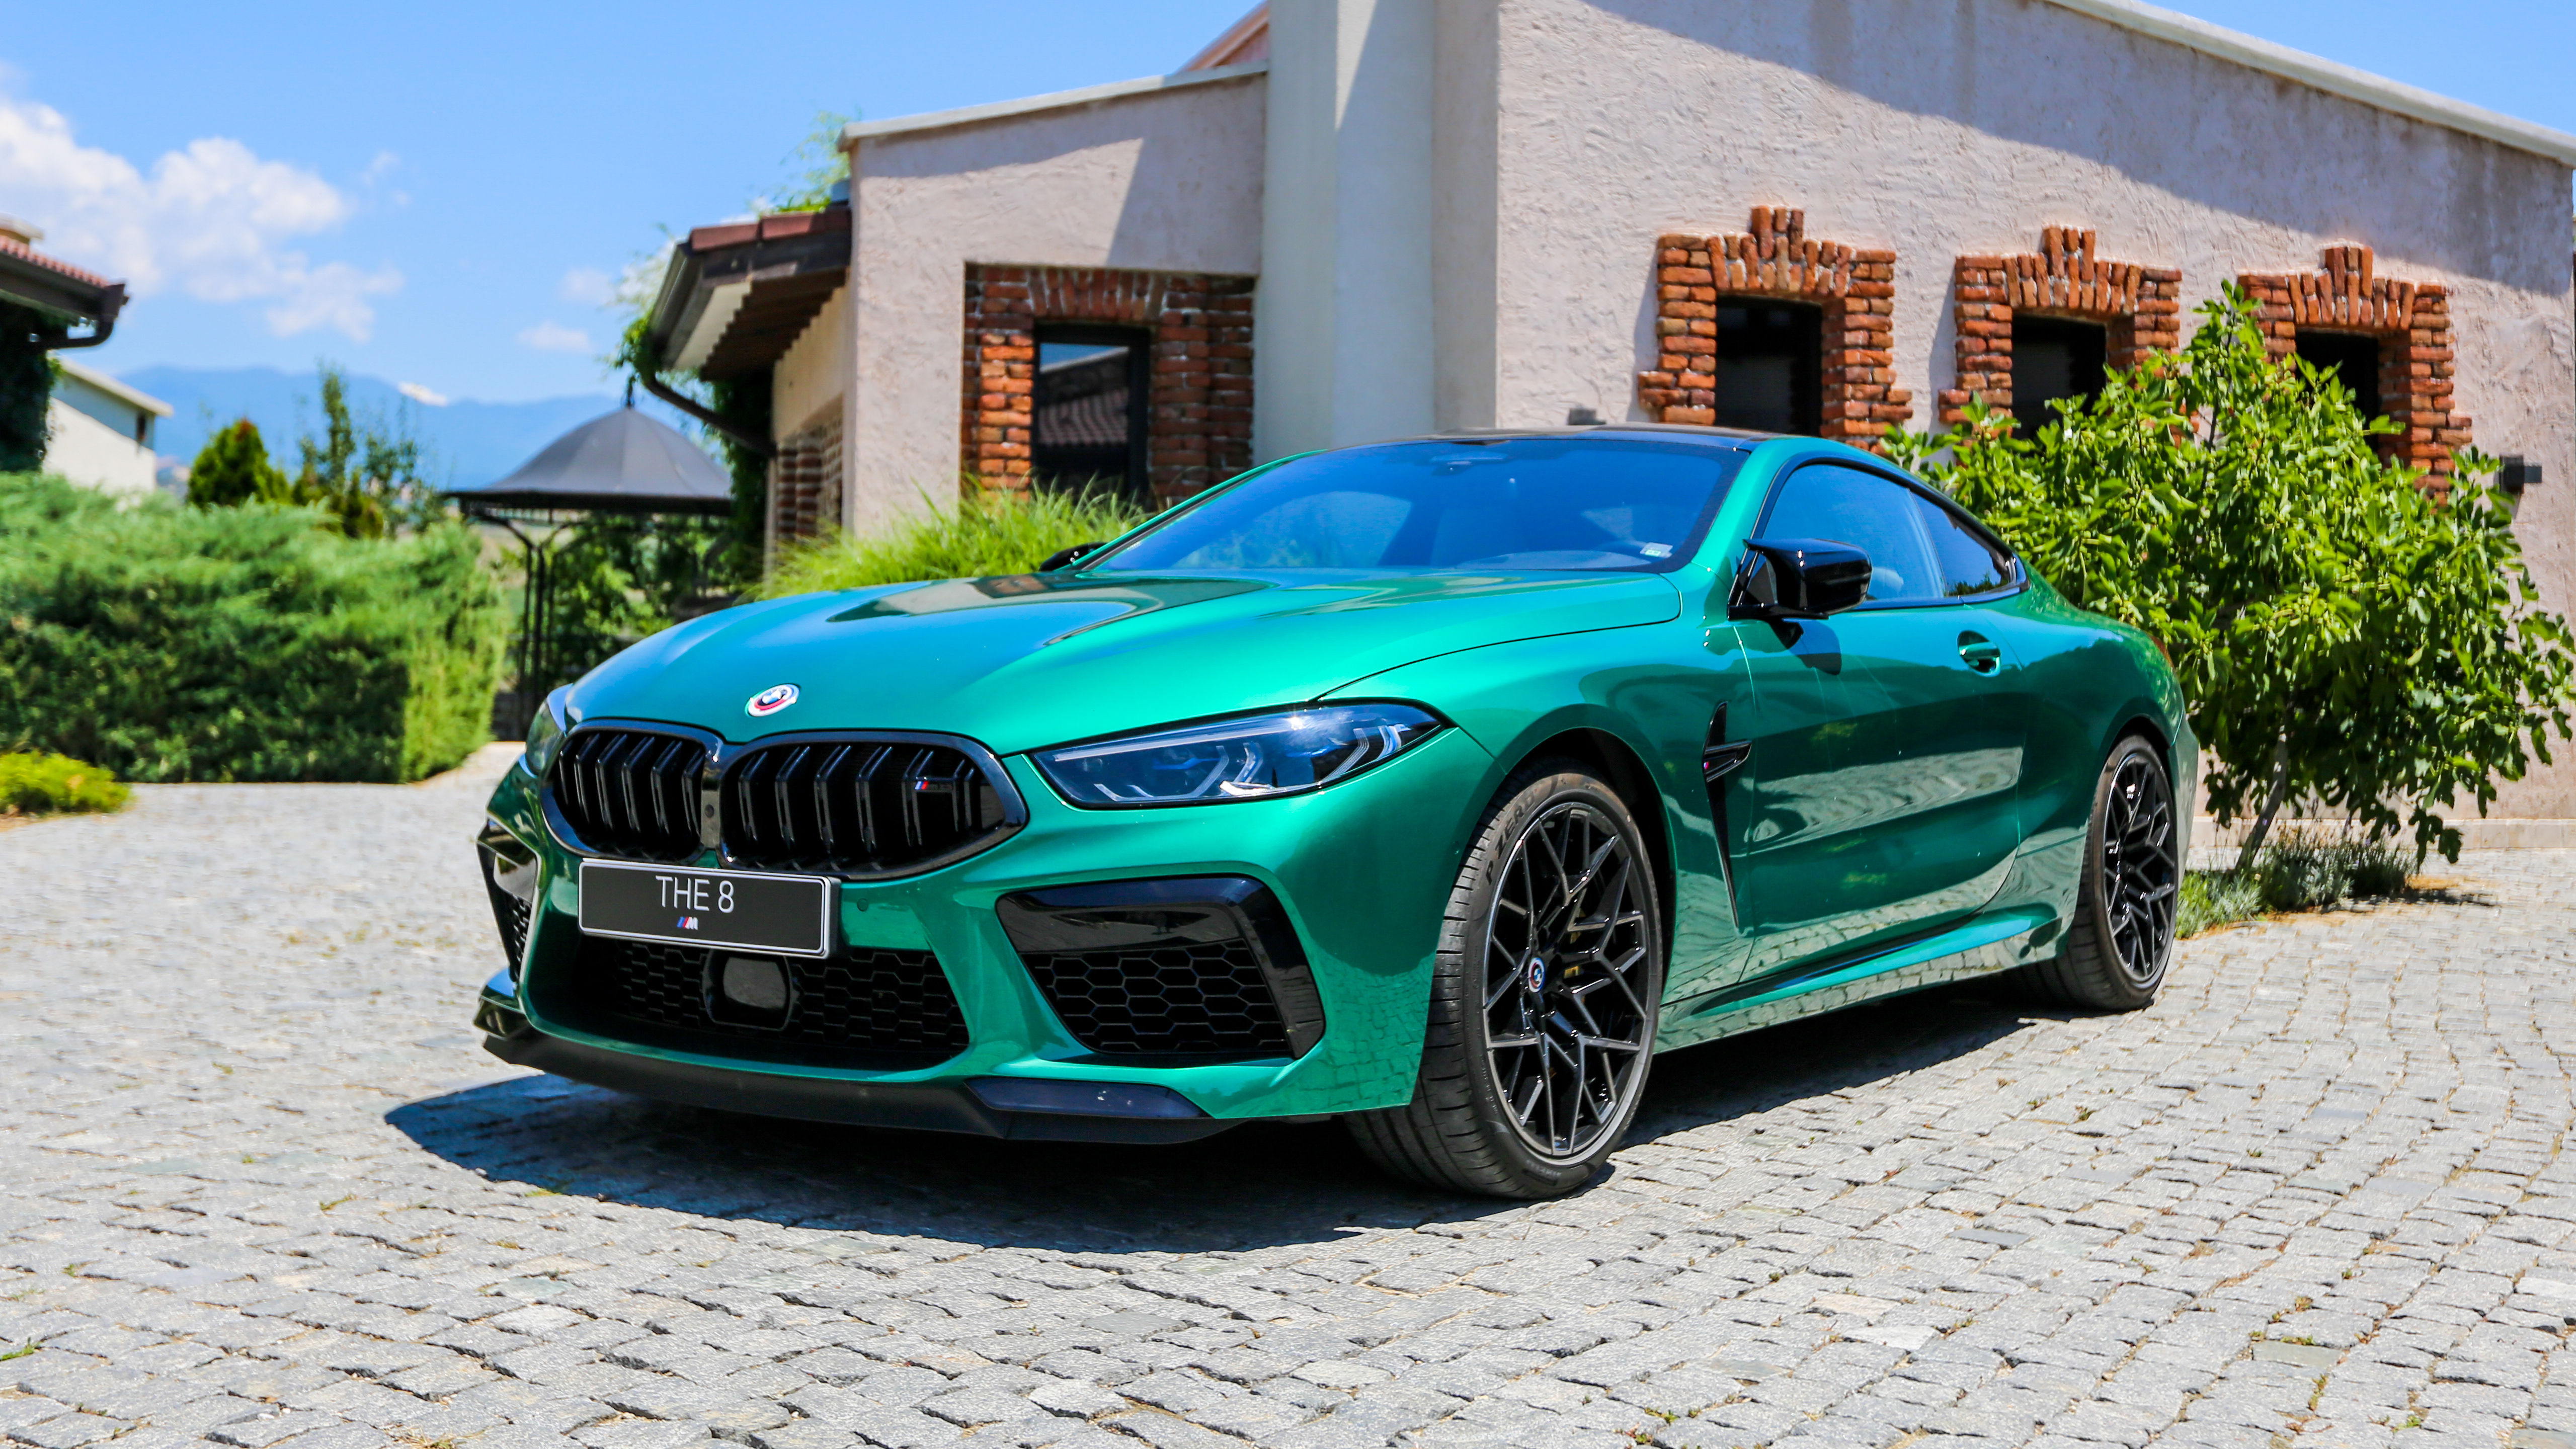 Bmw 8 competition. BMW m8 2022. BMW m8 Competition Coupe. BMW m8 Coupe 2022. BMW m8 Competition 2022.